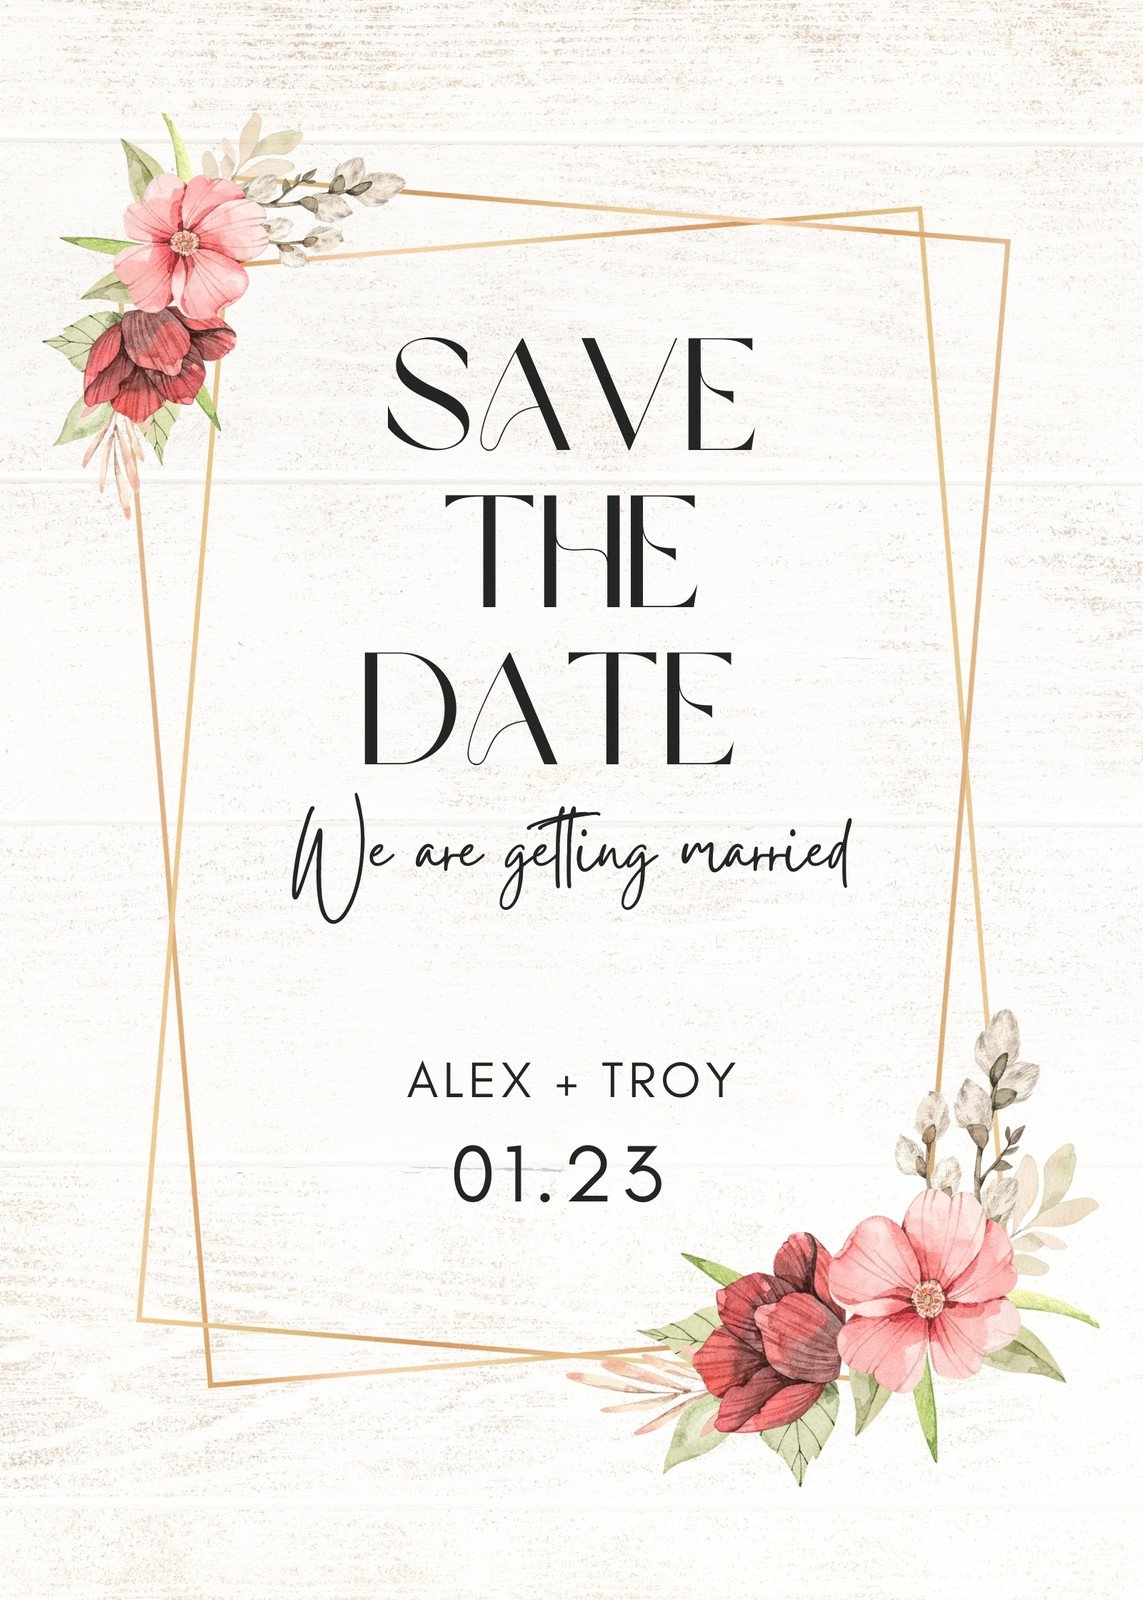 Free And Customizable Save The Date Templates